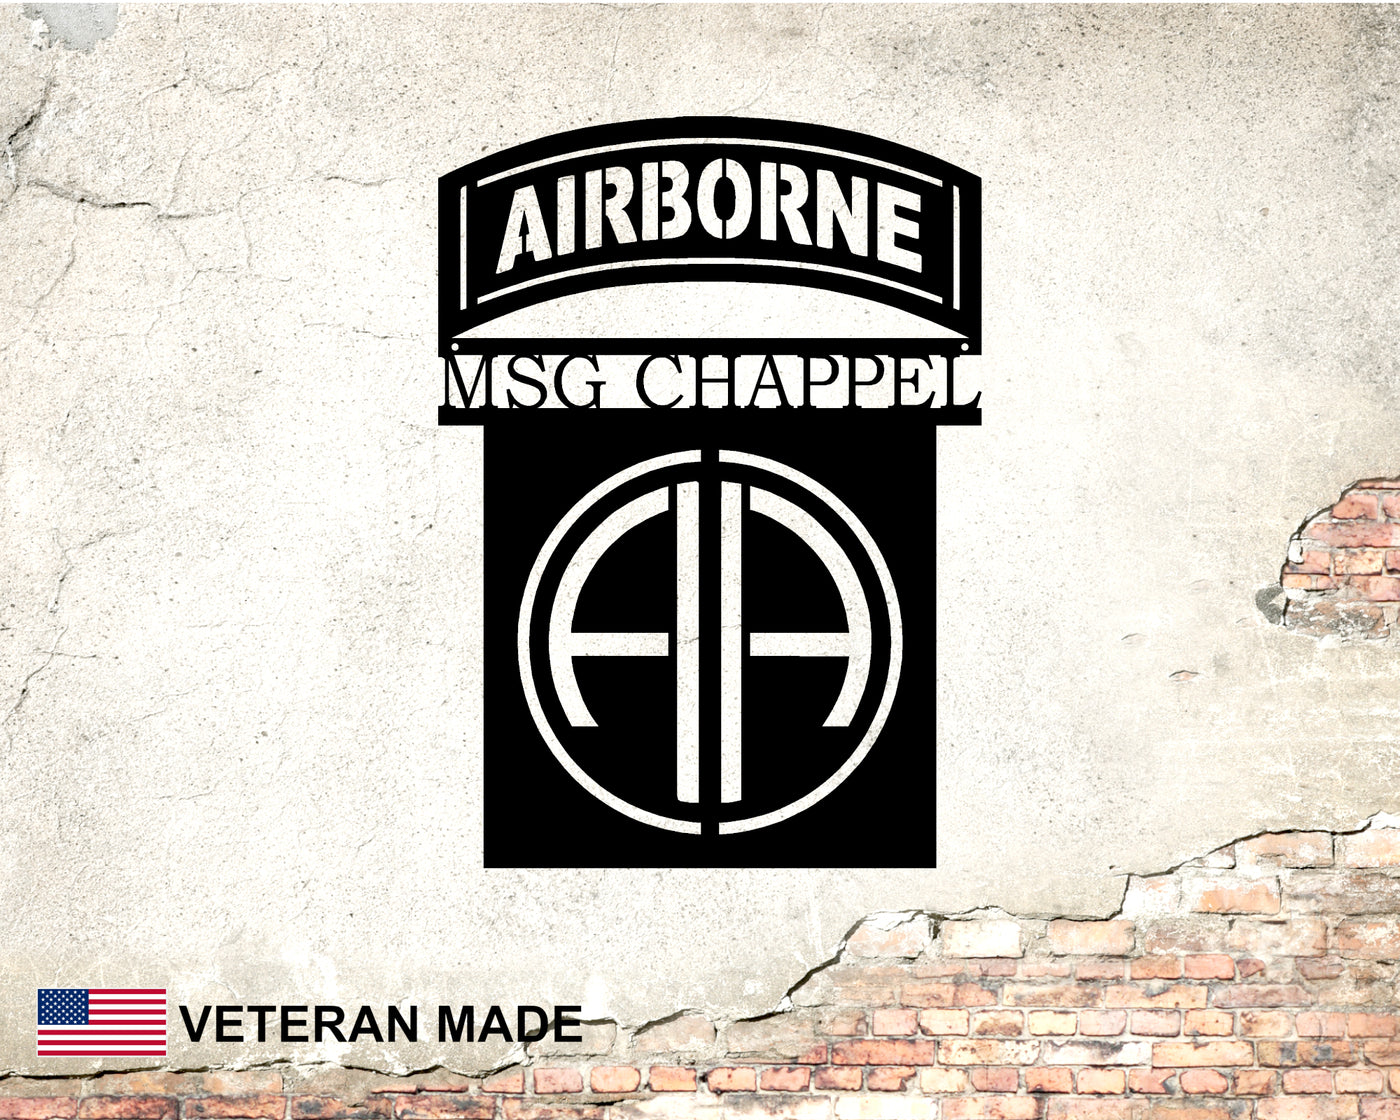 Personalized 82nd Airborne Metal Sign with Rank and Name - Madison Iron and Wood - Personalized sign - metal outdoor decor - Steel deocrations - american made products - veteran owned business products - fencing decorations - fencing supplies - custom wall decorations - personalized wall signs - steel - decorative post caps - steel post caps - metal post caps - brackets - structural brackets - home improvement - easter - easter decorations - easter gift - easter yard decor